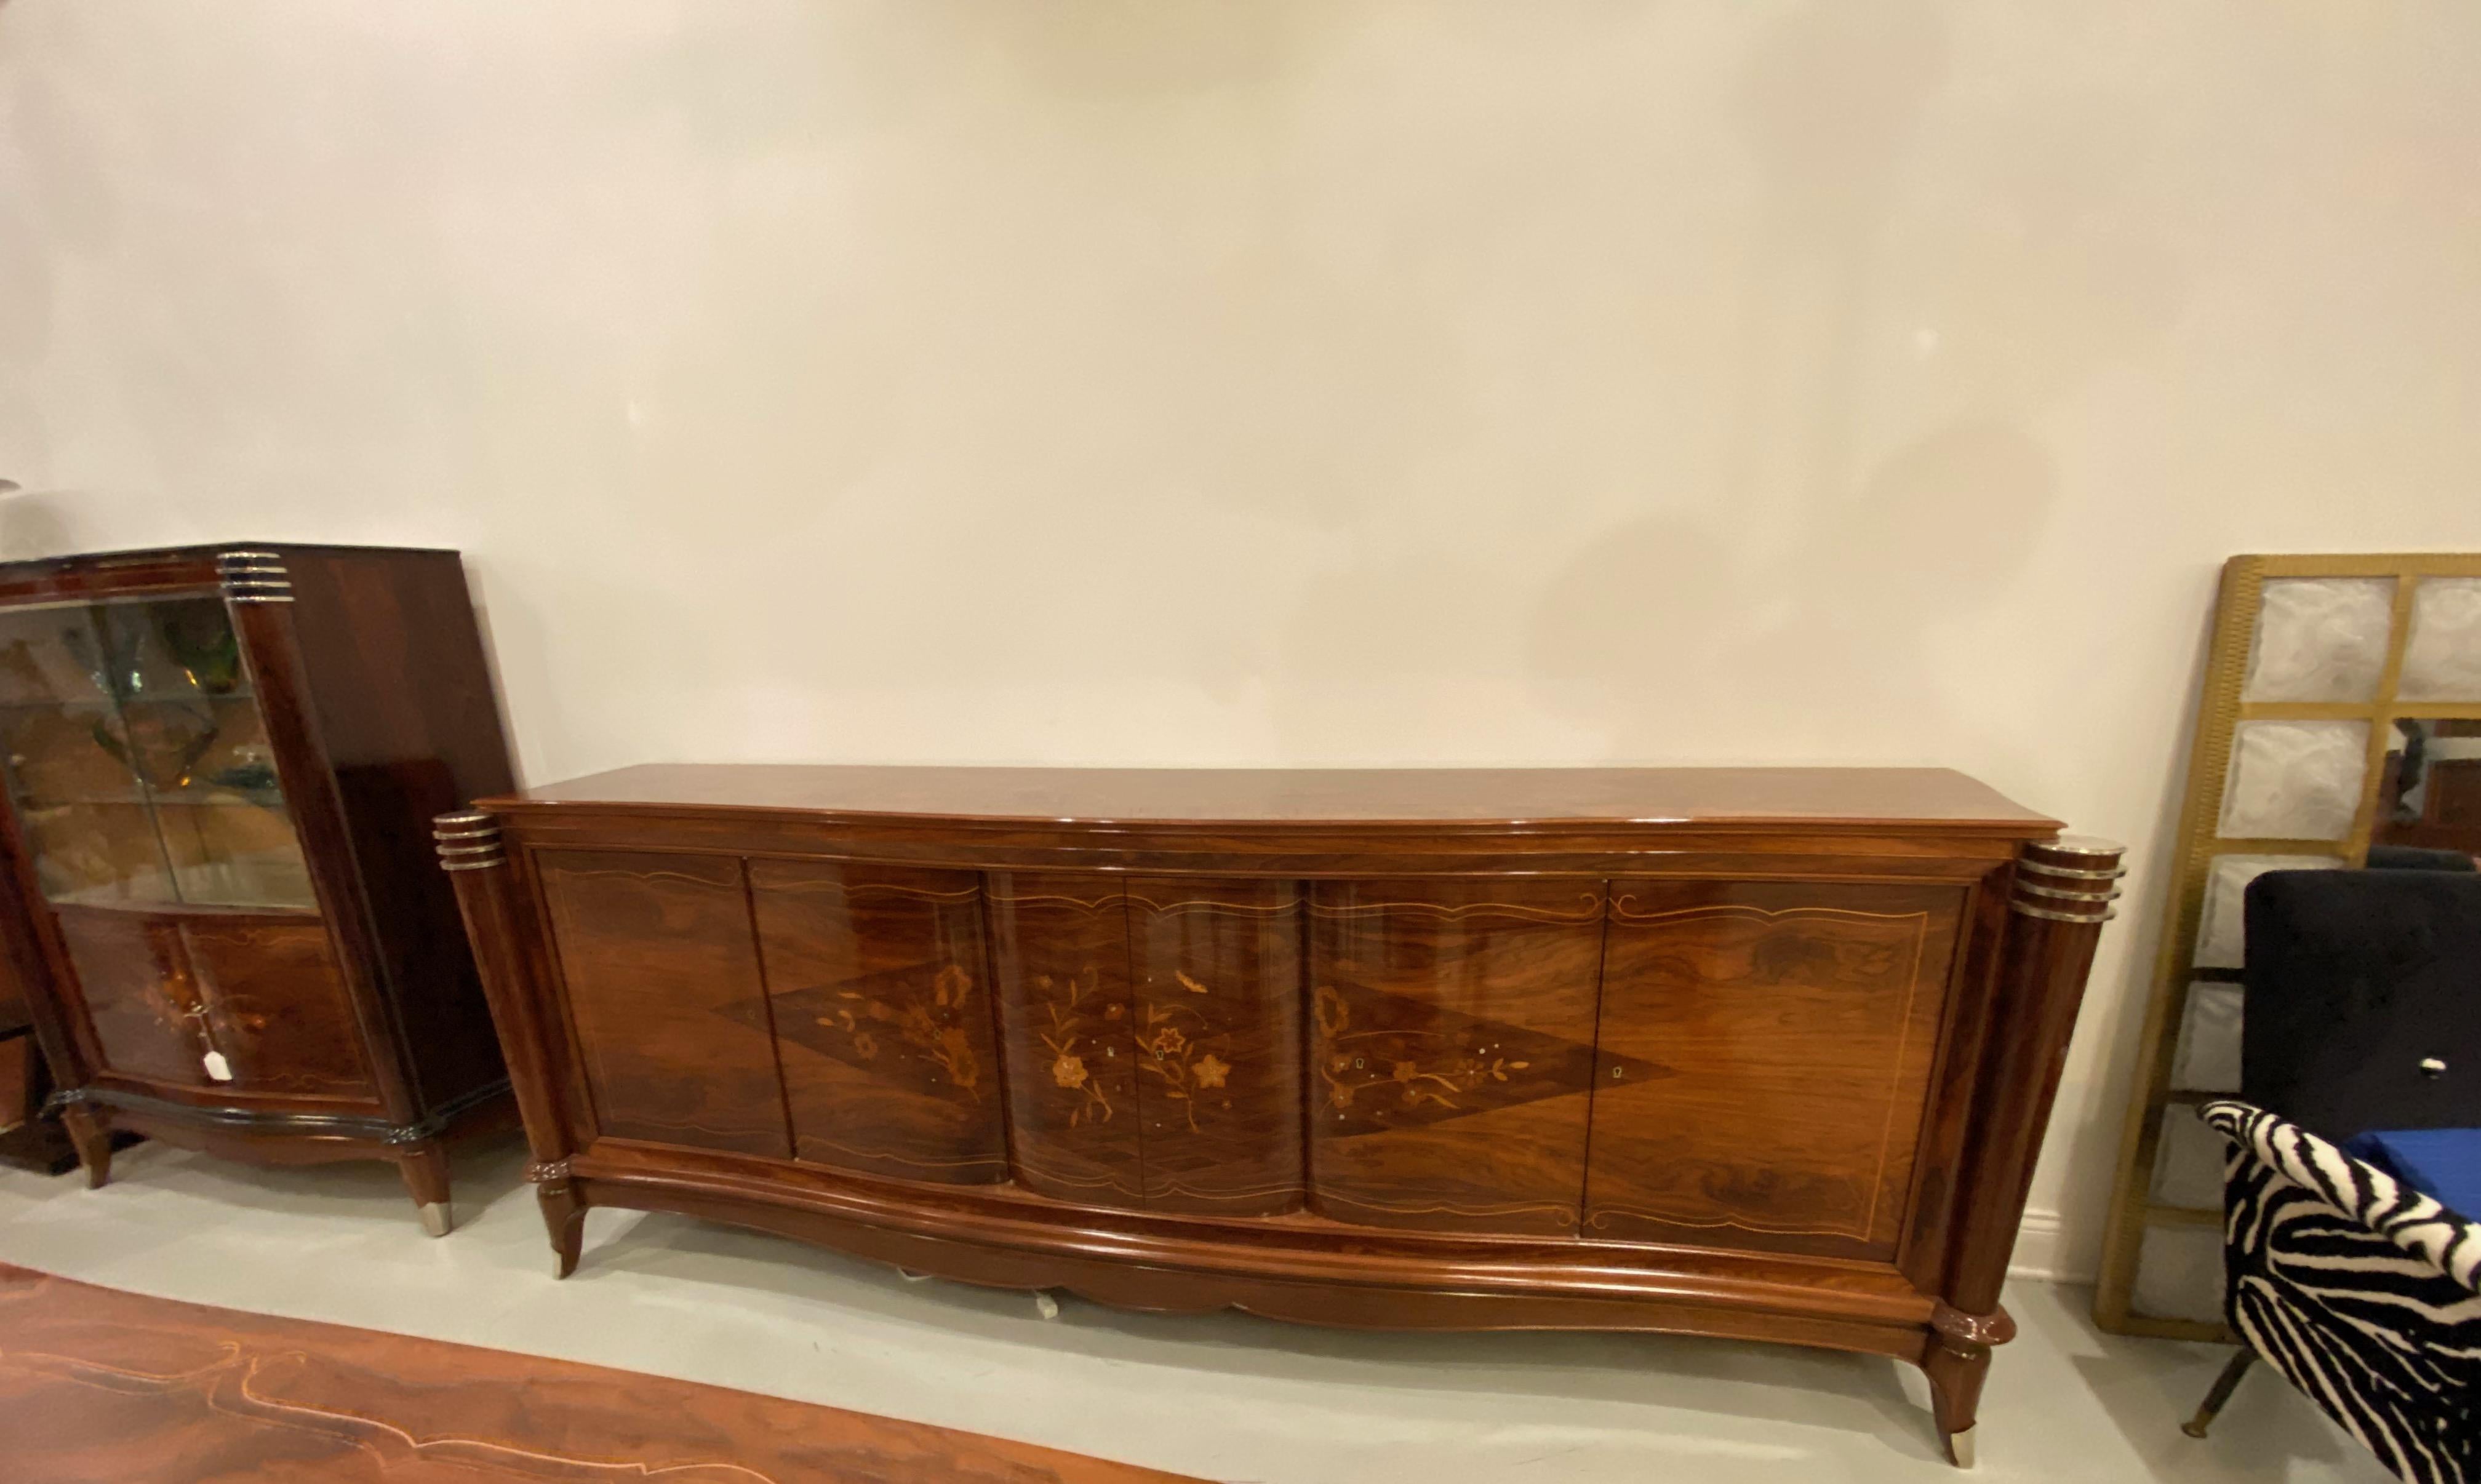 Gorgeous French Art Deco six-door buffet in the style of Jules Leleu. With beautiful rosewood and mother-of-pearl inlay along with stunning marquetry. The middle doors open to reveal a bank of draws while the outer doors reveal shelfs. Having